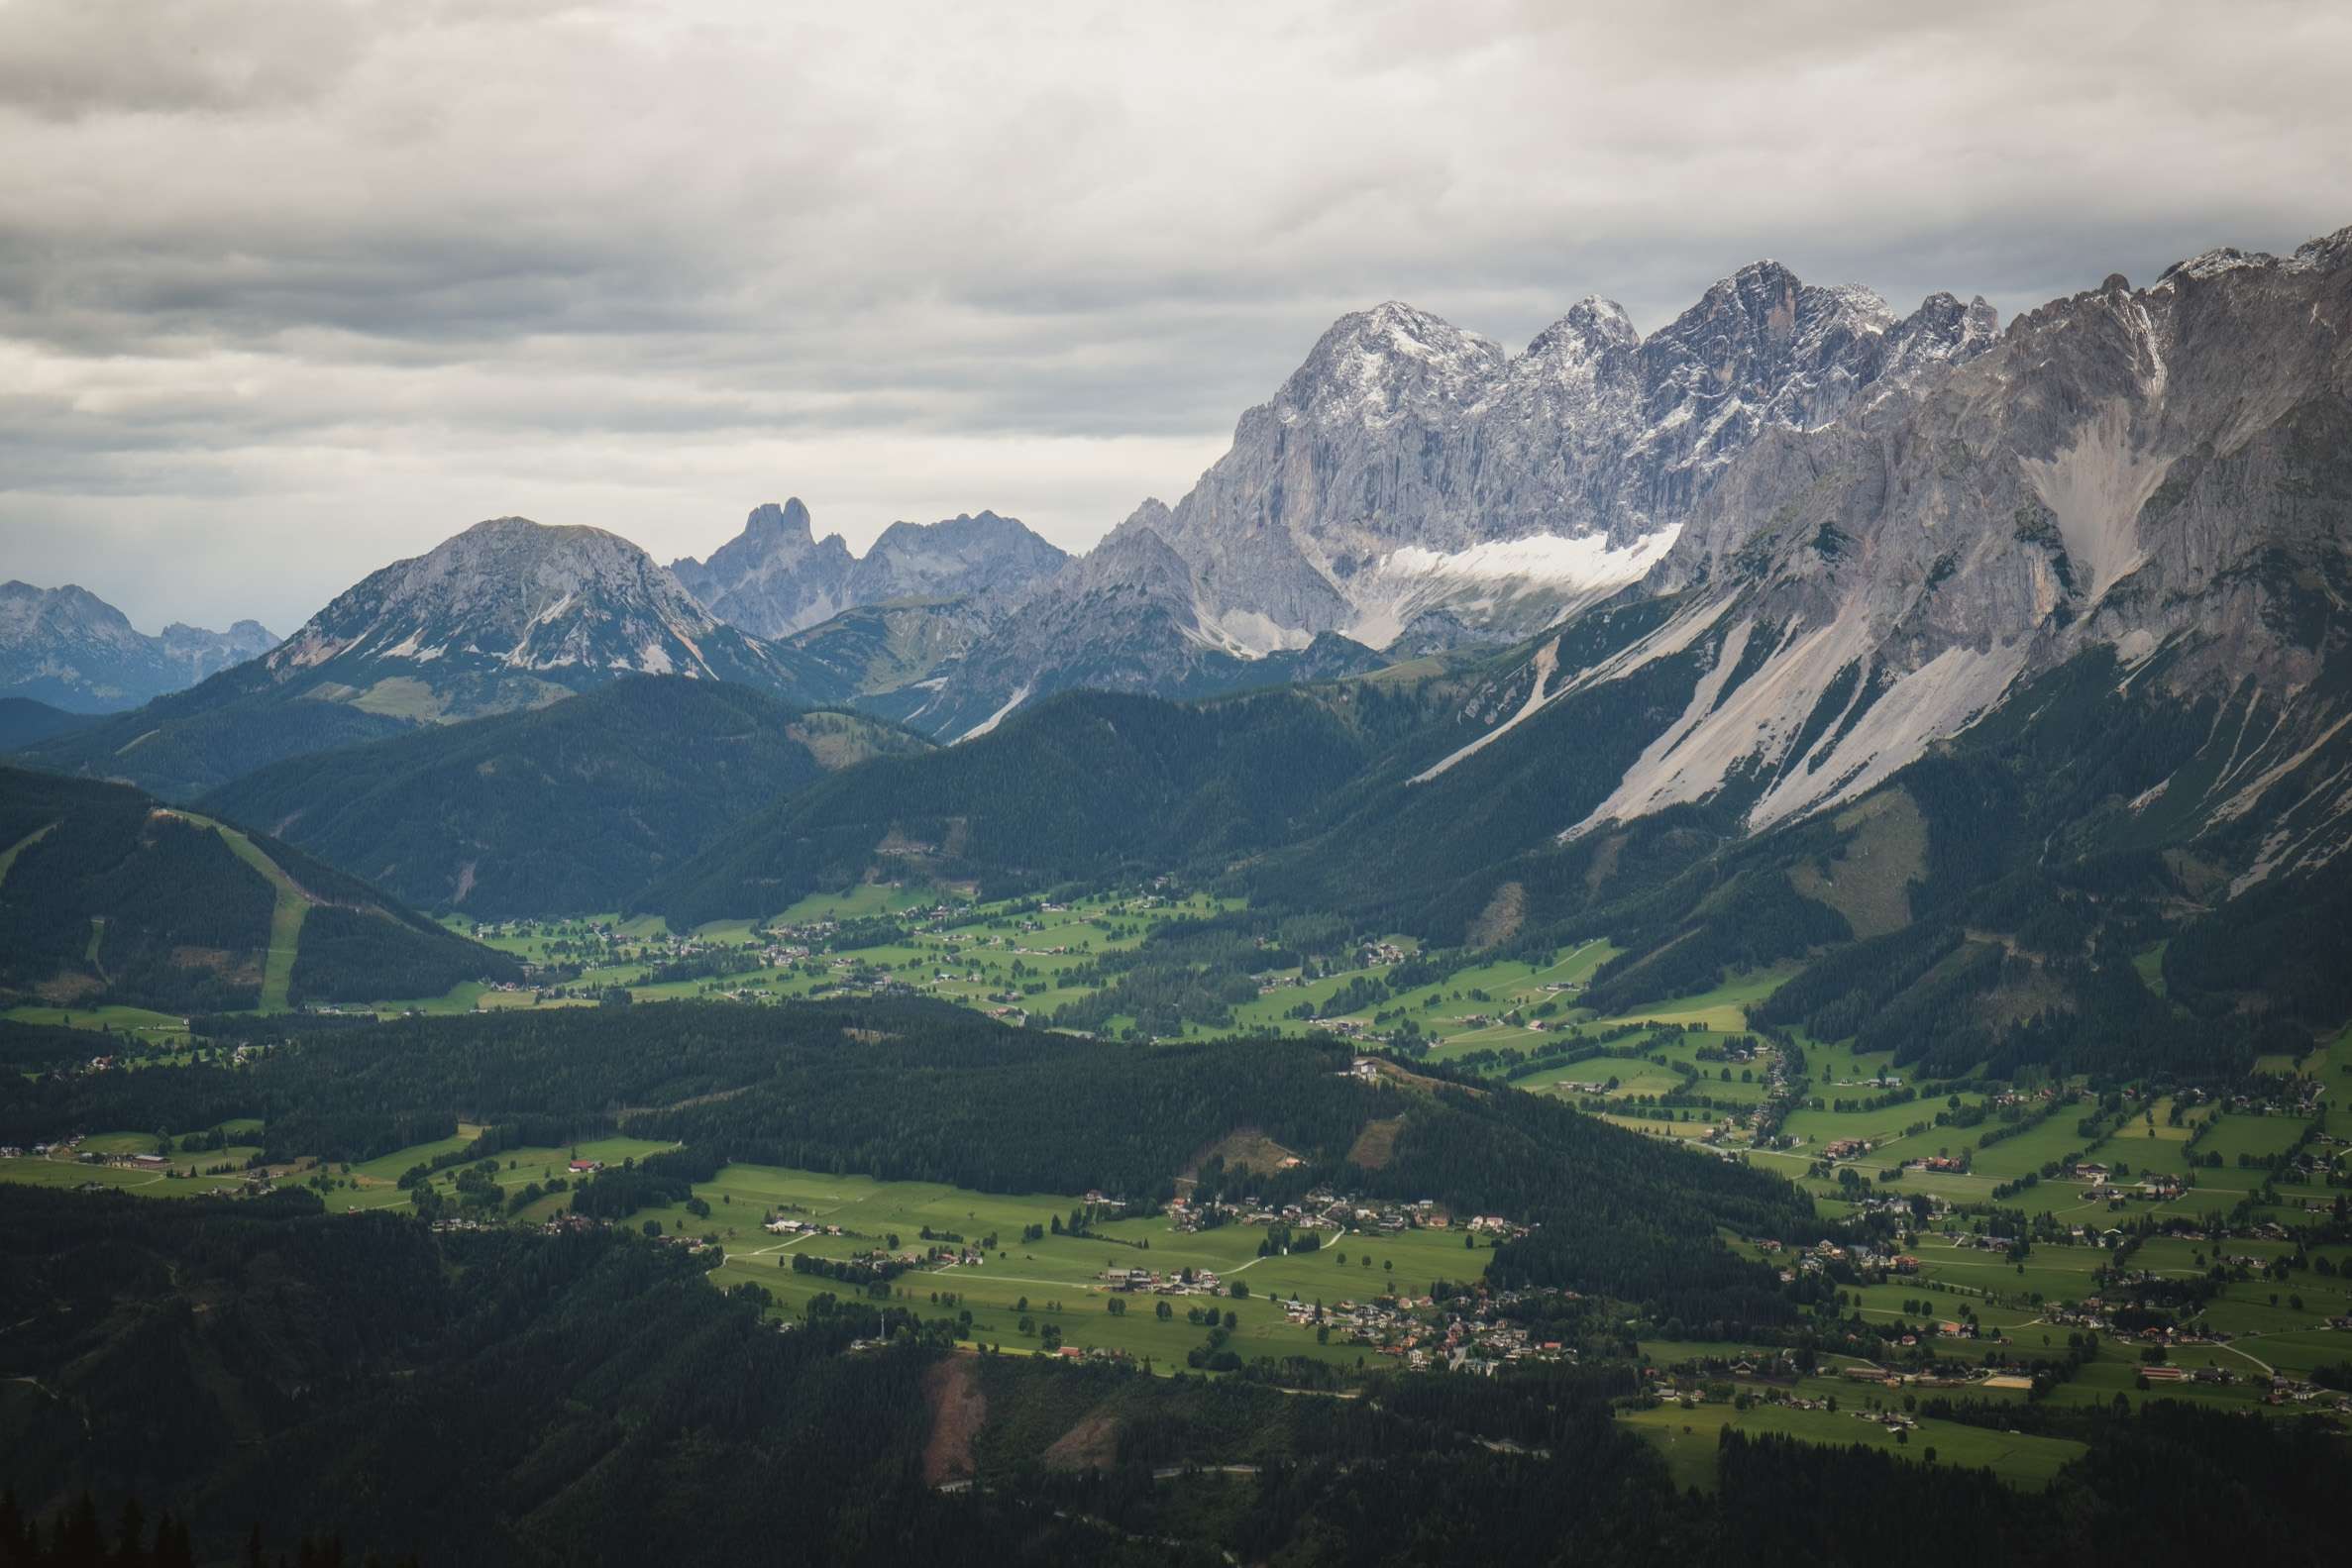 Schladming and the surrounding valley with the towering Dachstein mountains in the background